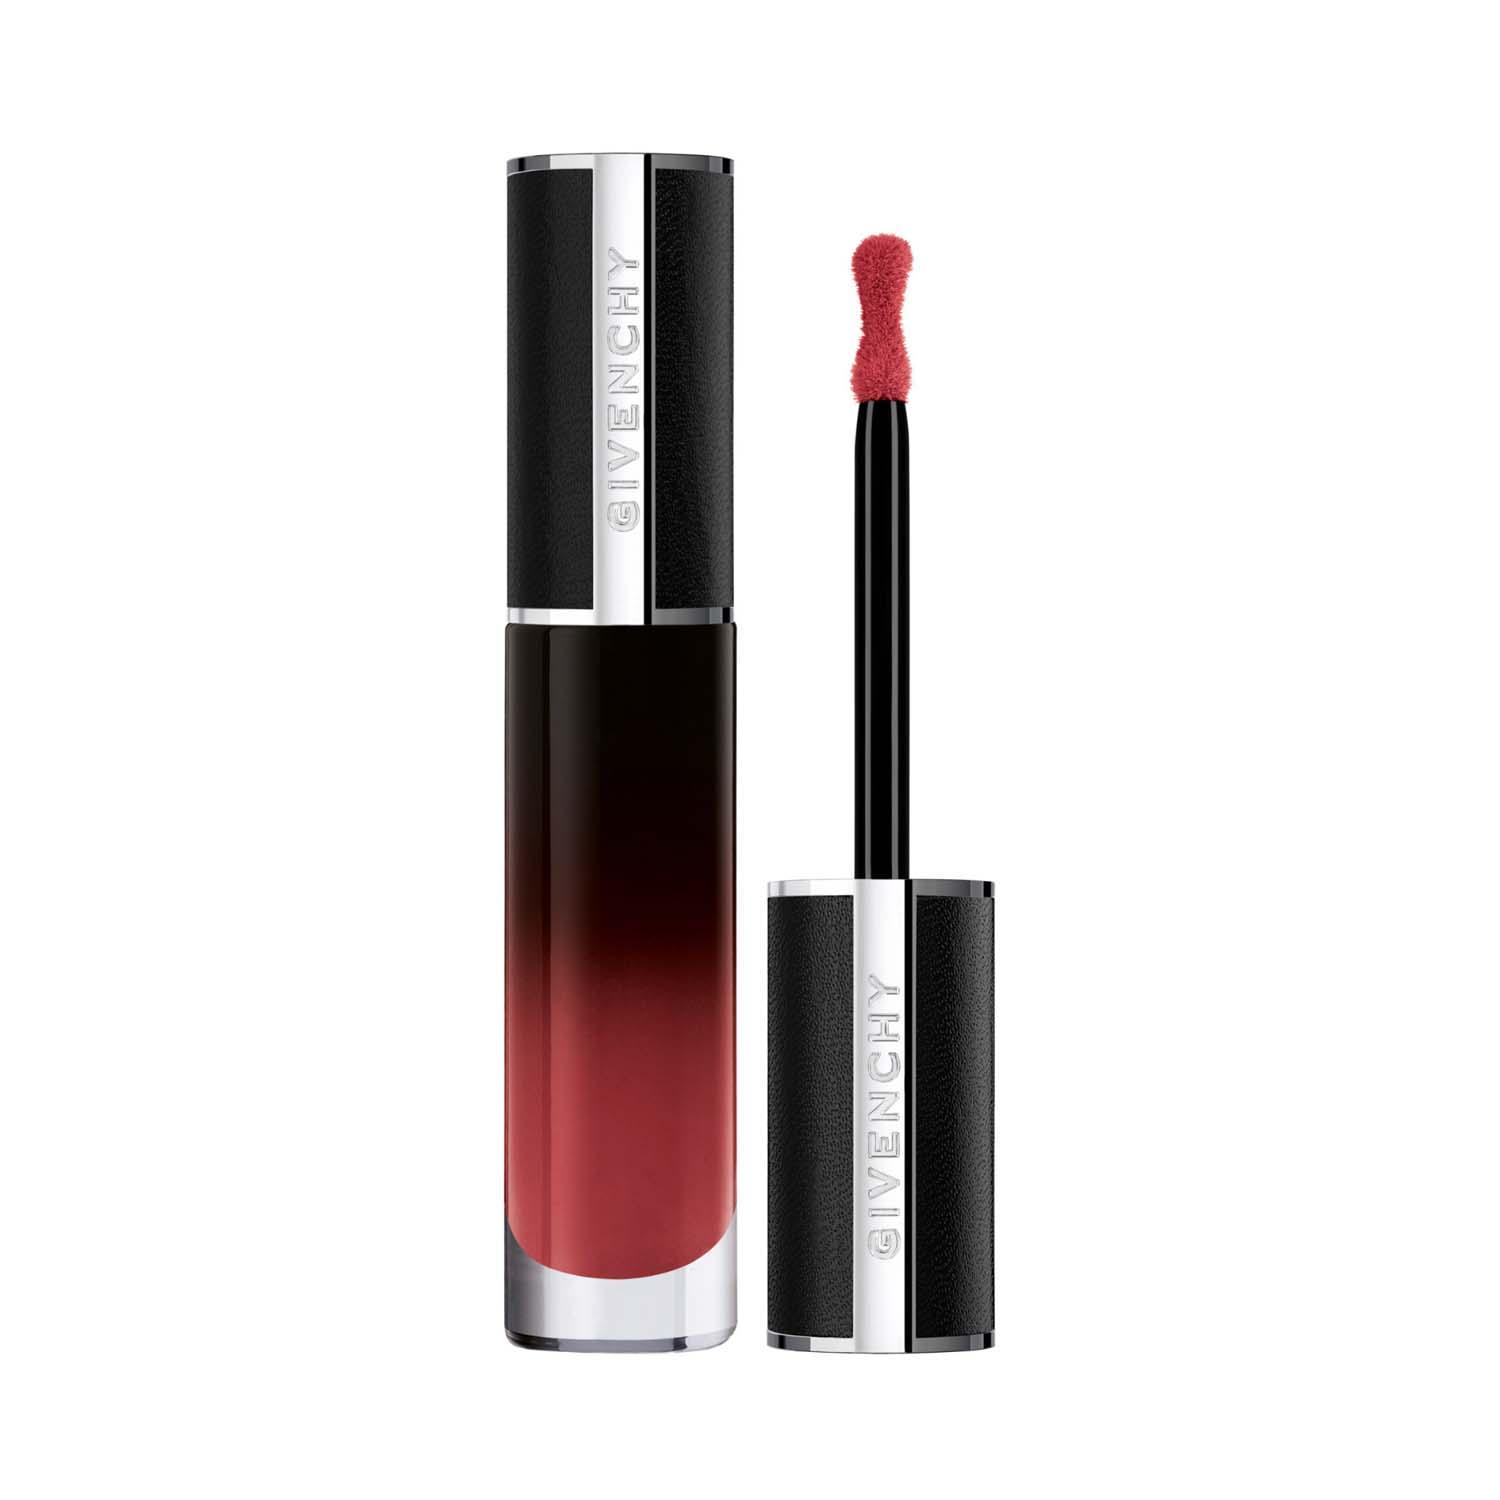 Givenchy | Givenchy Le Rouge Interdit Cream Velvet Liquid Lipstick - N27 Rouge Infuse (6.5 ml)